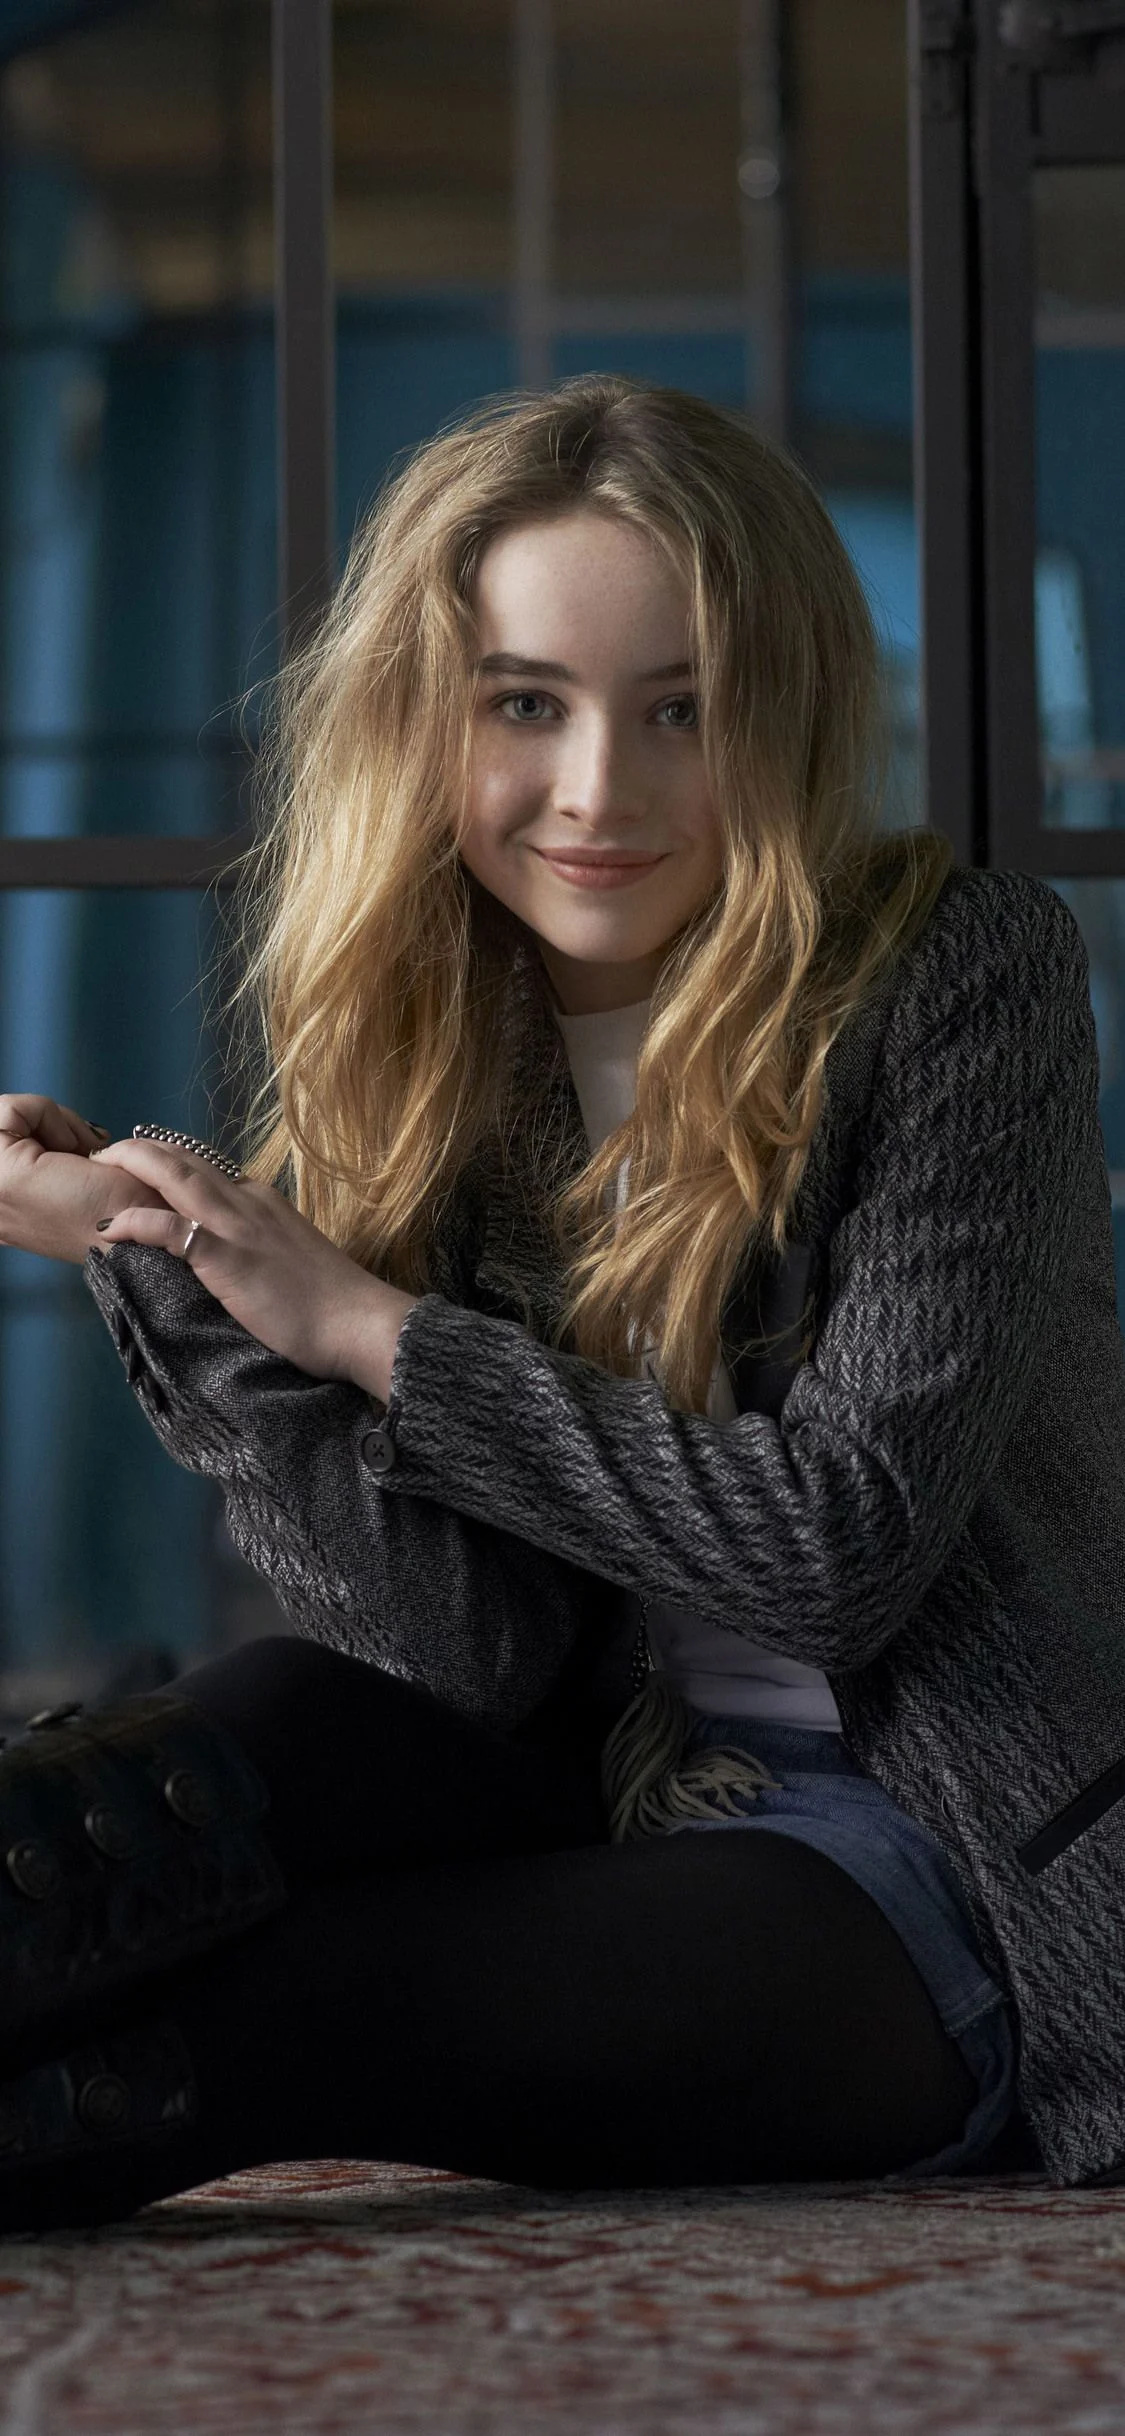 Sabrina Carpenter Movies, iPhone backgrounds, Latest images, Celebrity wallpapers, 1130x2440 HD Phone